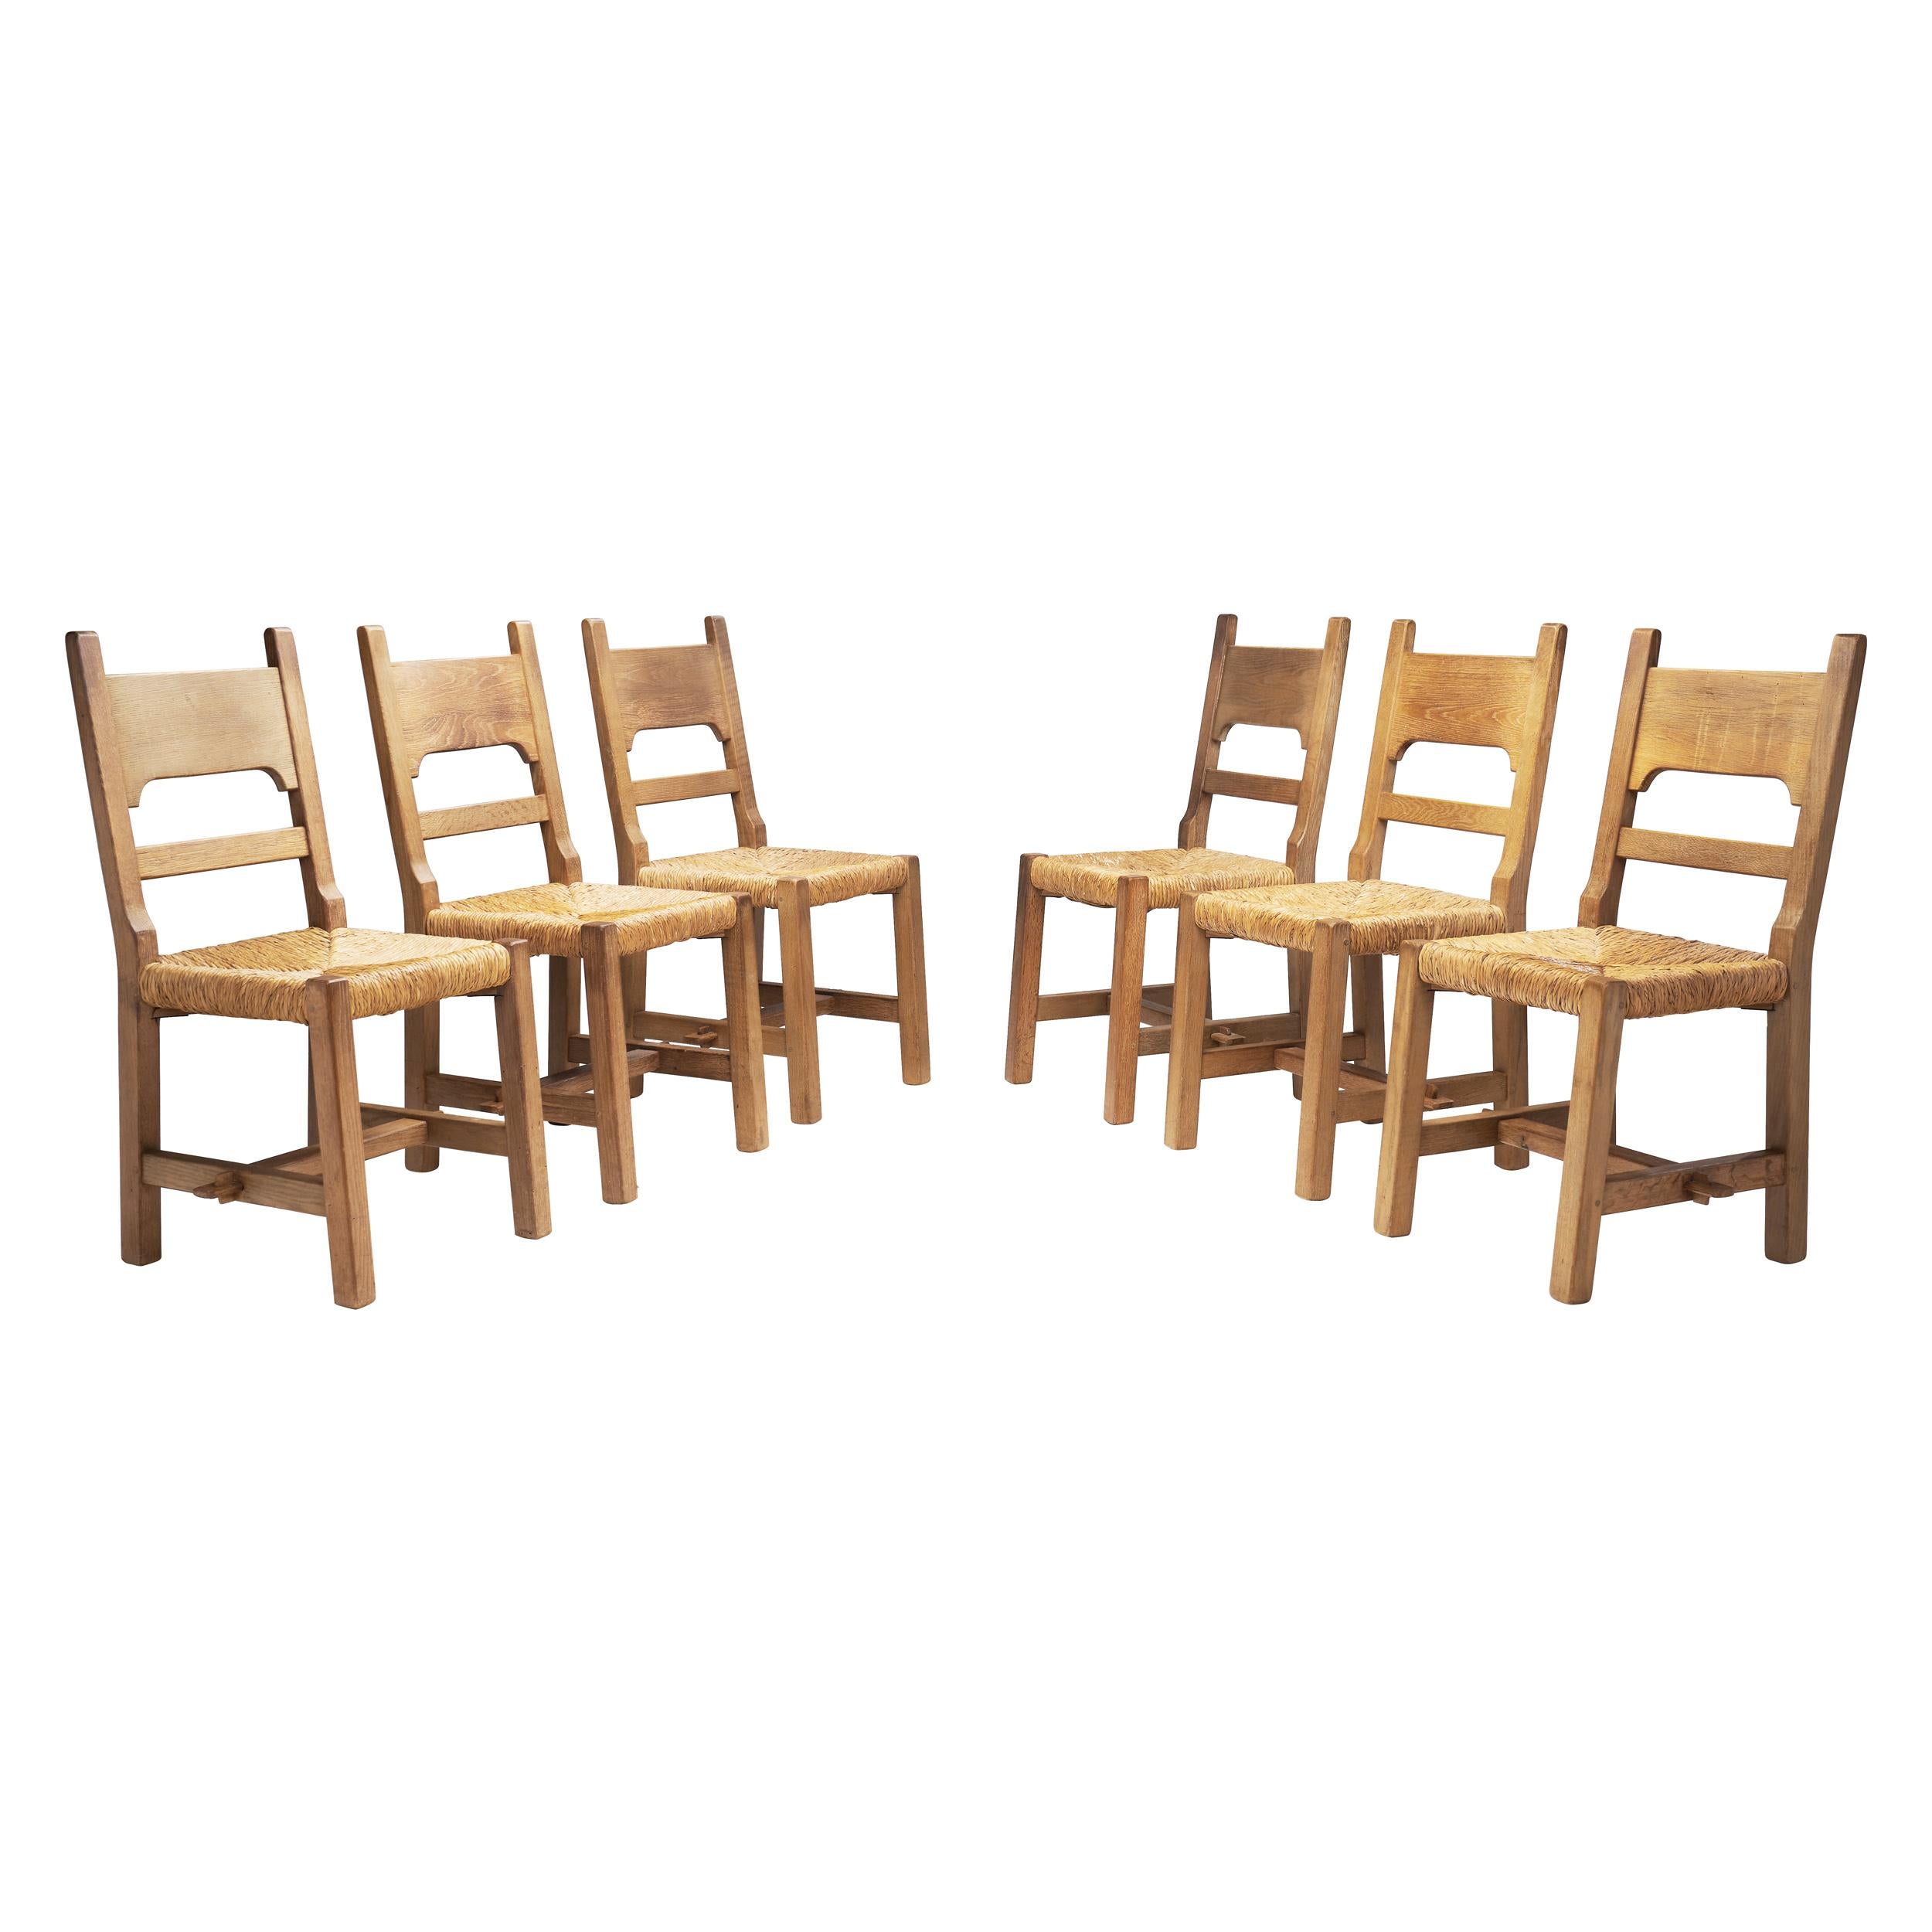 Six Brutalist Dining Chairs with Rush Seats, Europe ca 1960s For Sale